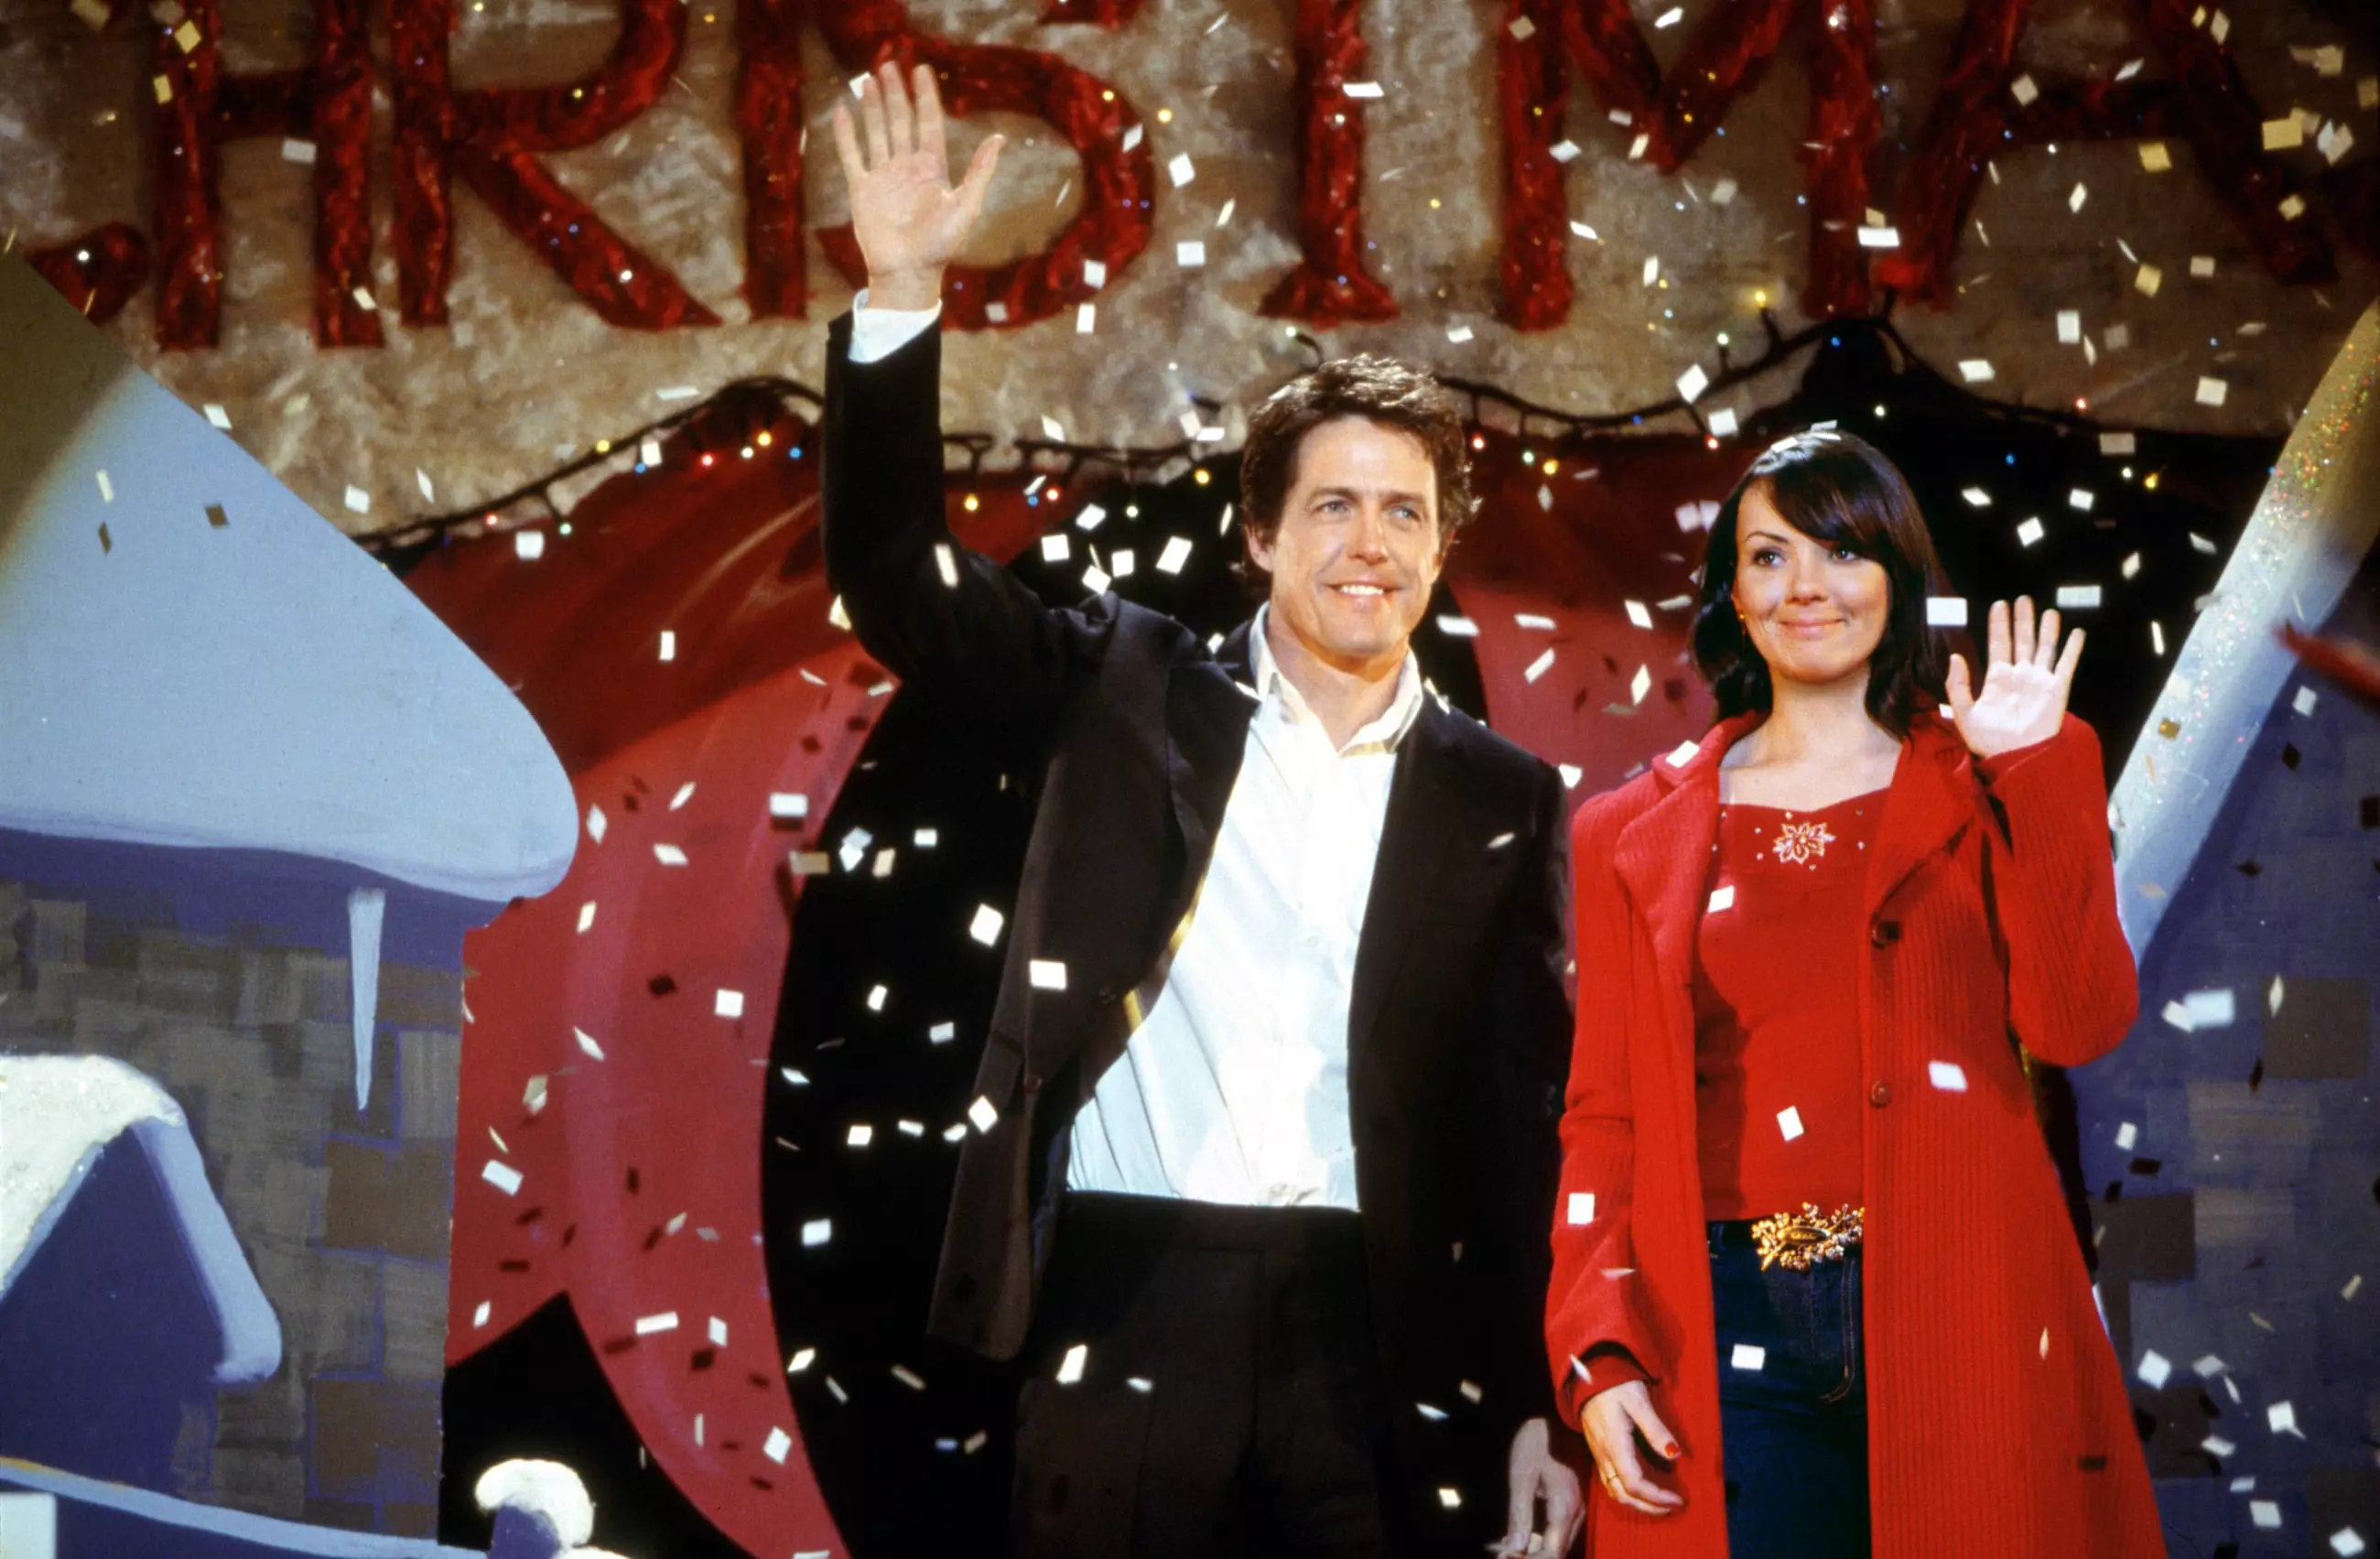 It's okay to watch Love Actually now, if you really want to (